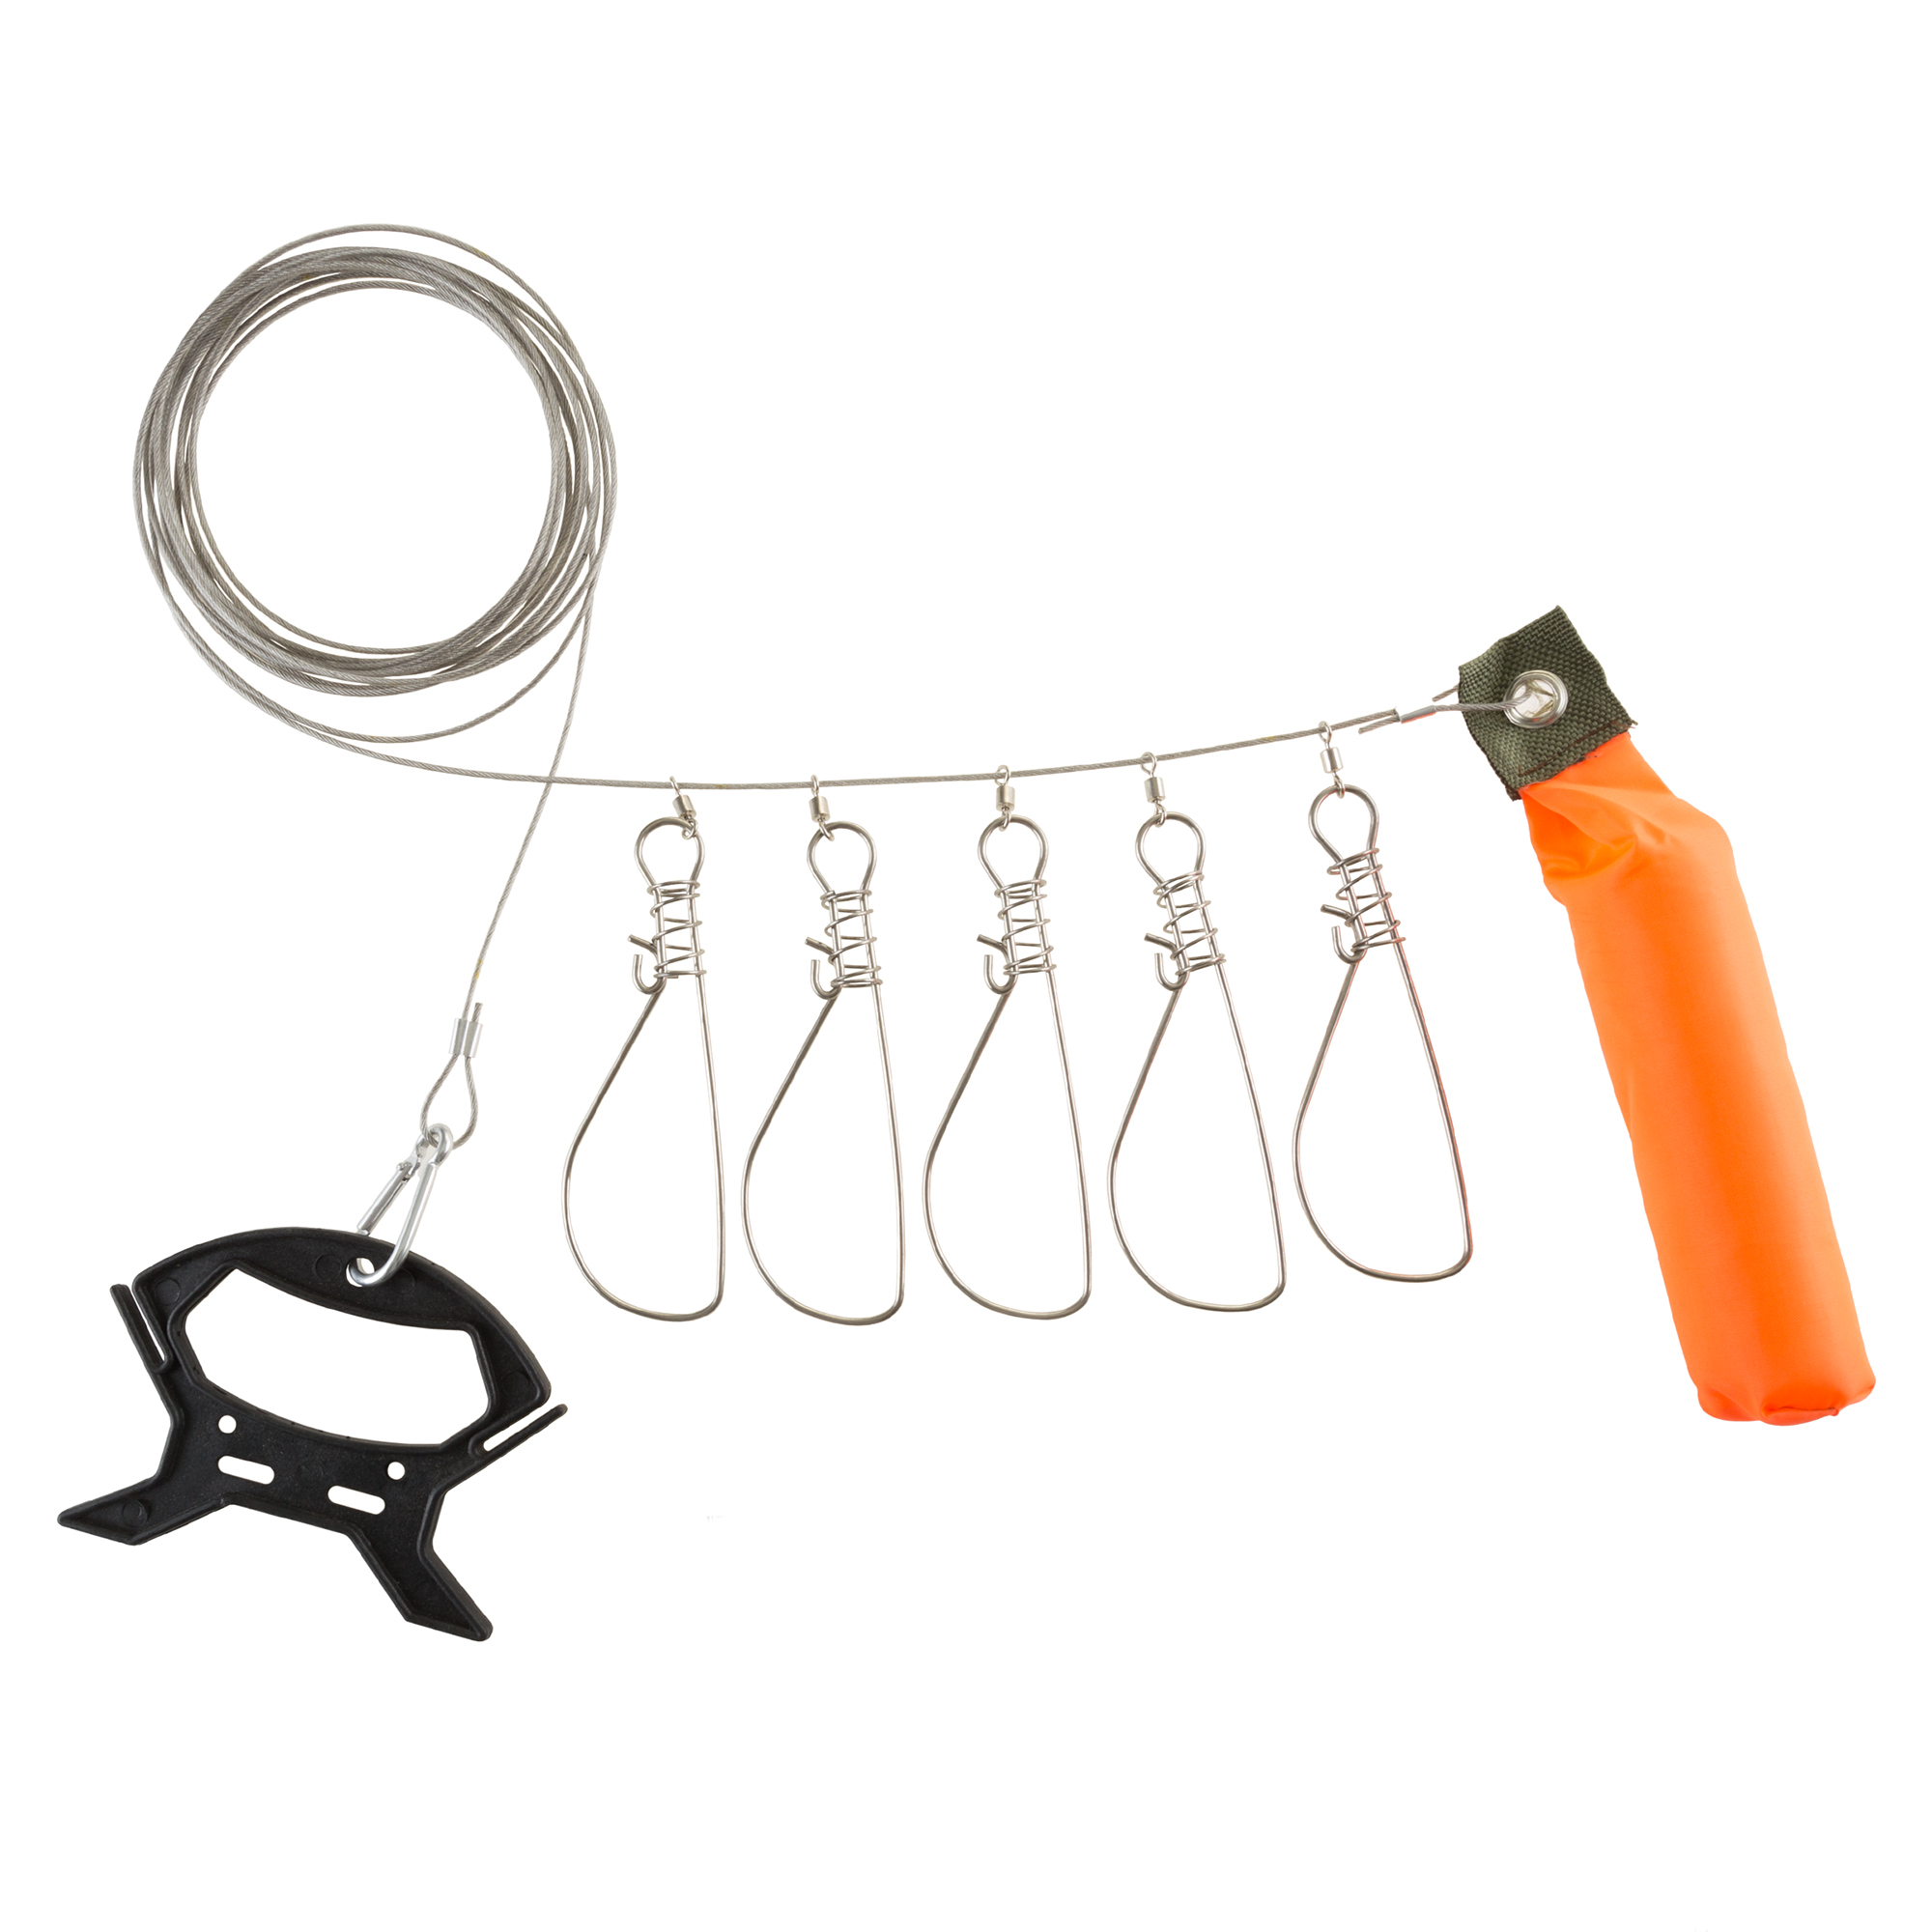 Fishing Stringer Live Fish Lock, With 10 Stainless Steel Fish